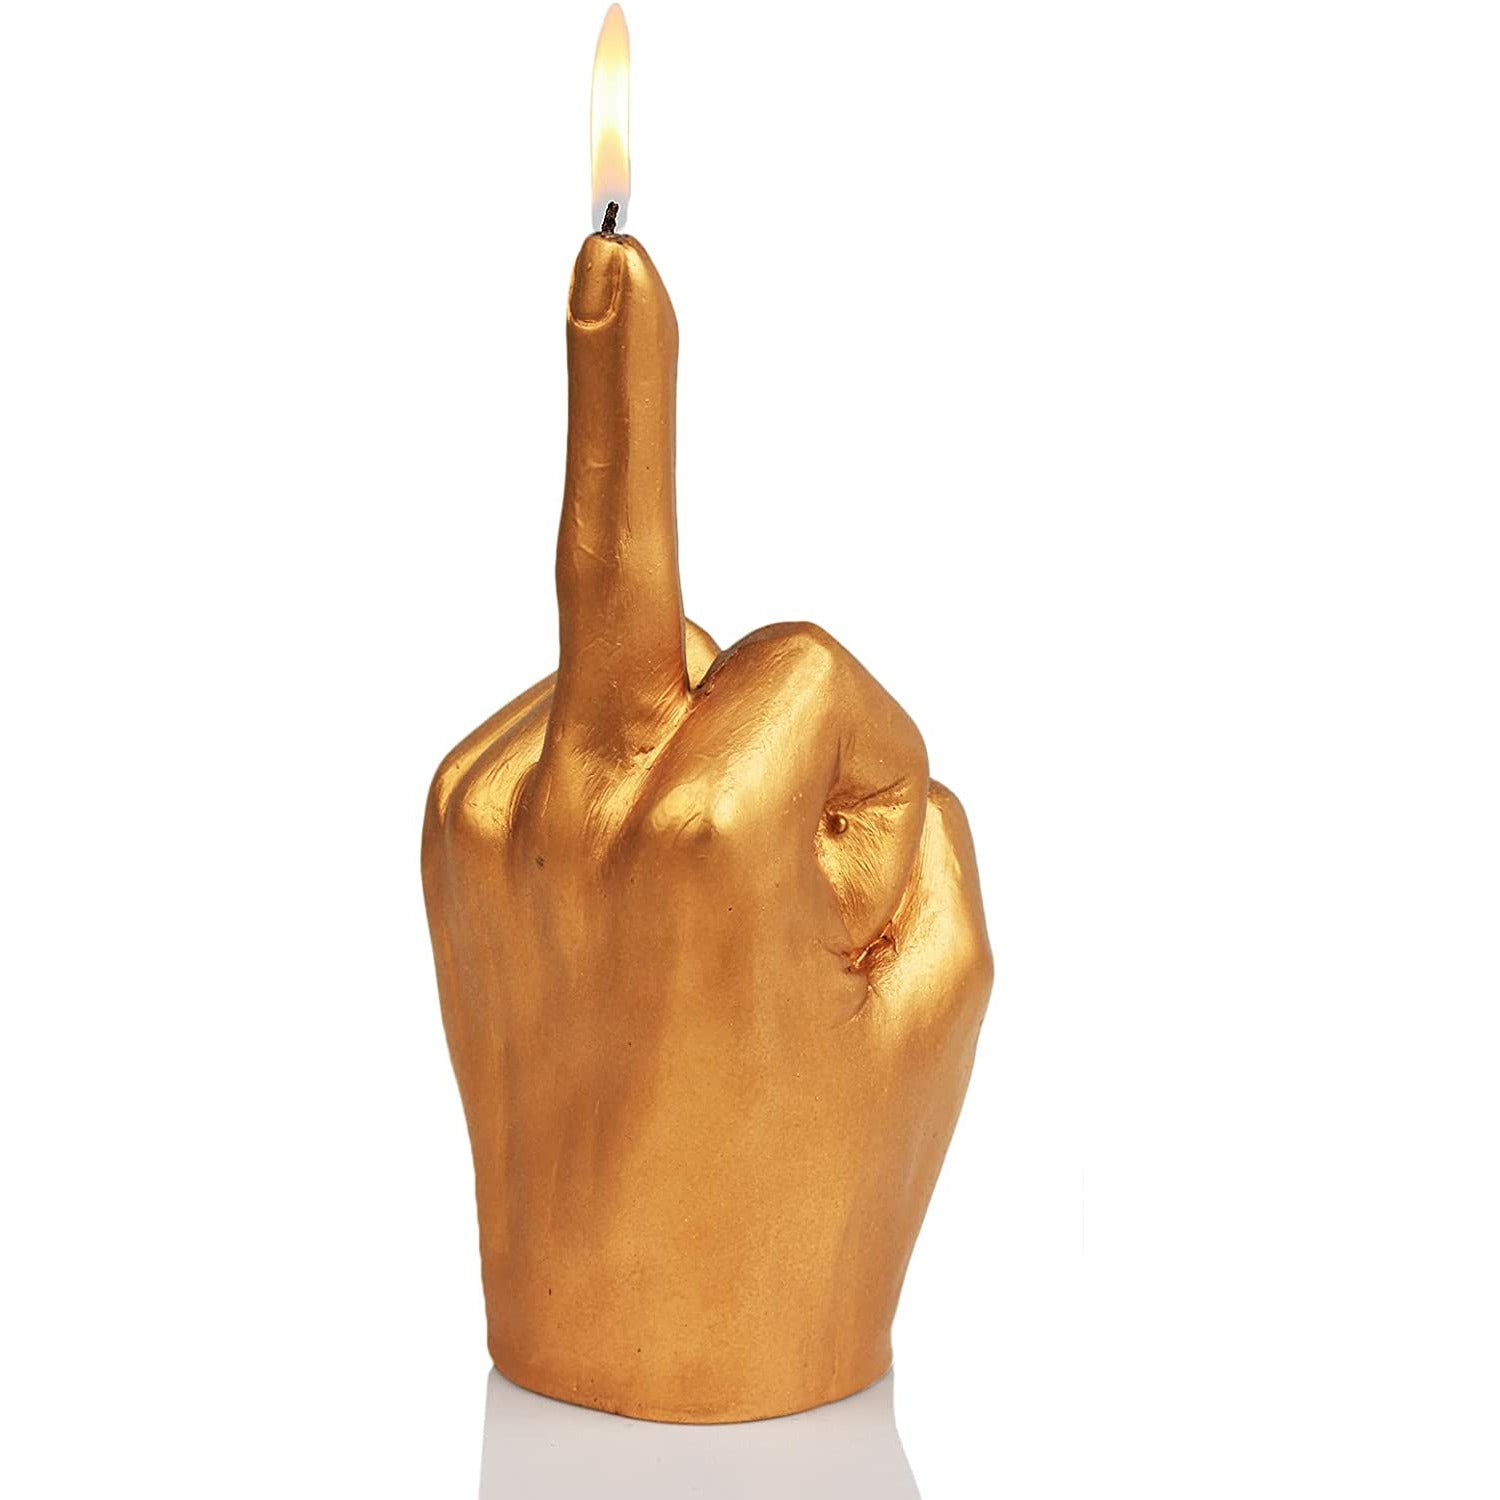 Middle Finger candle – Our Candles